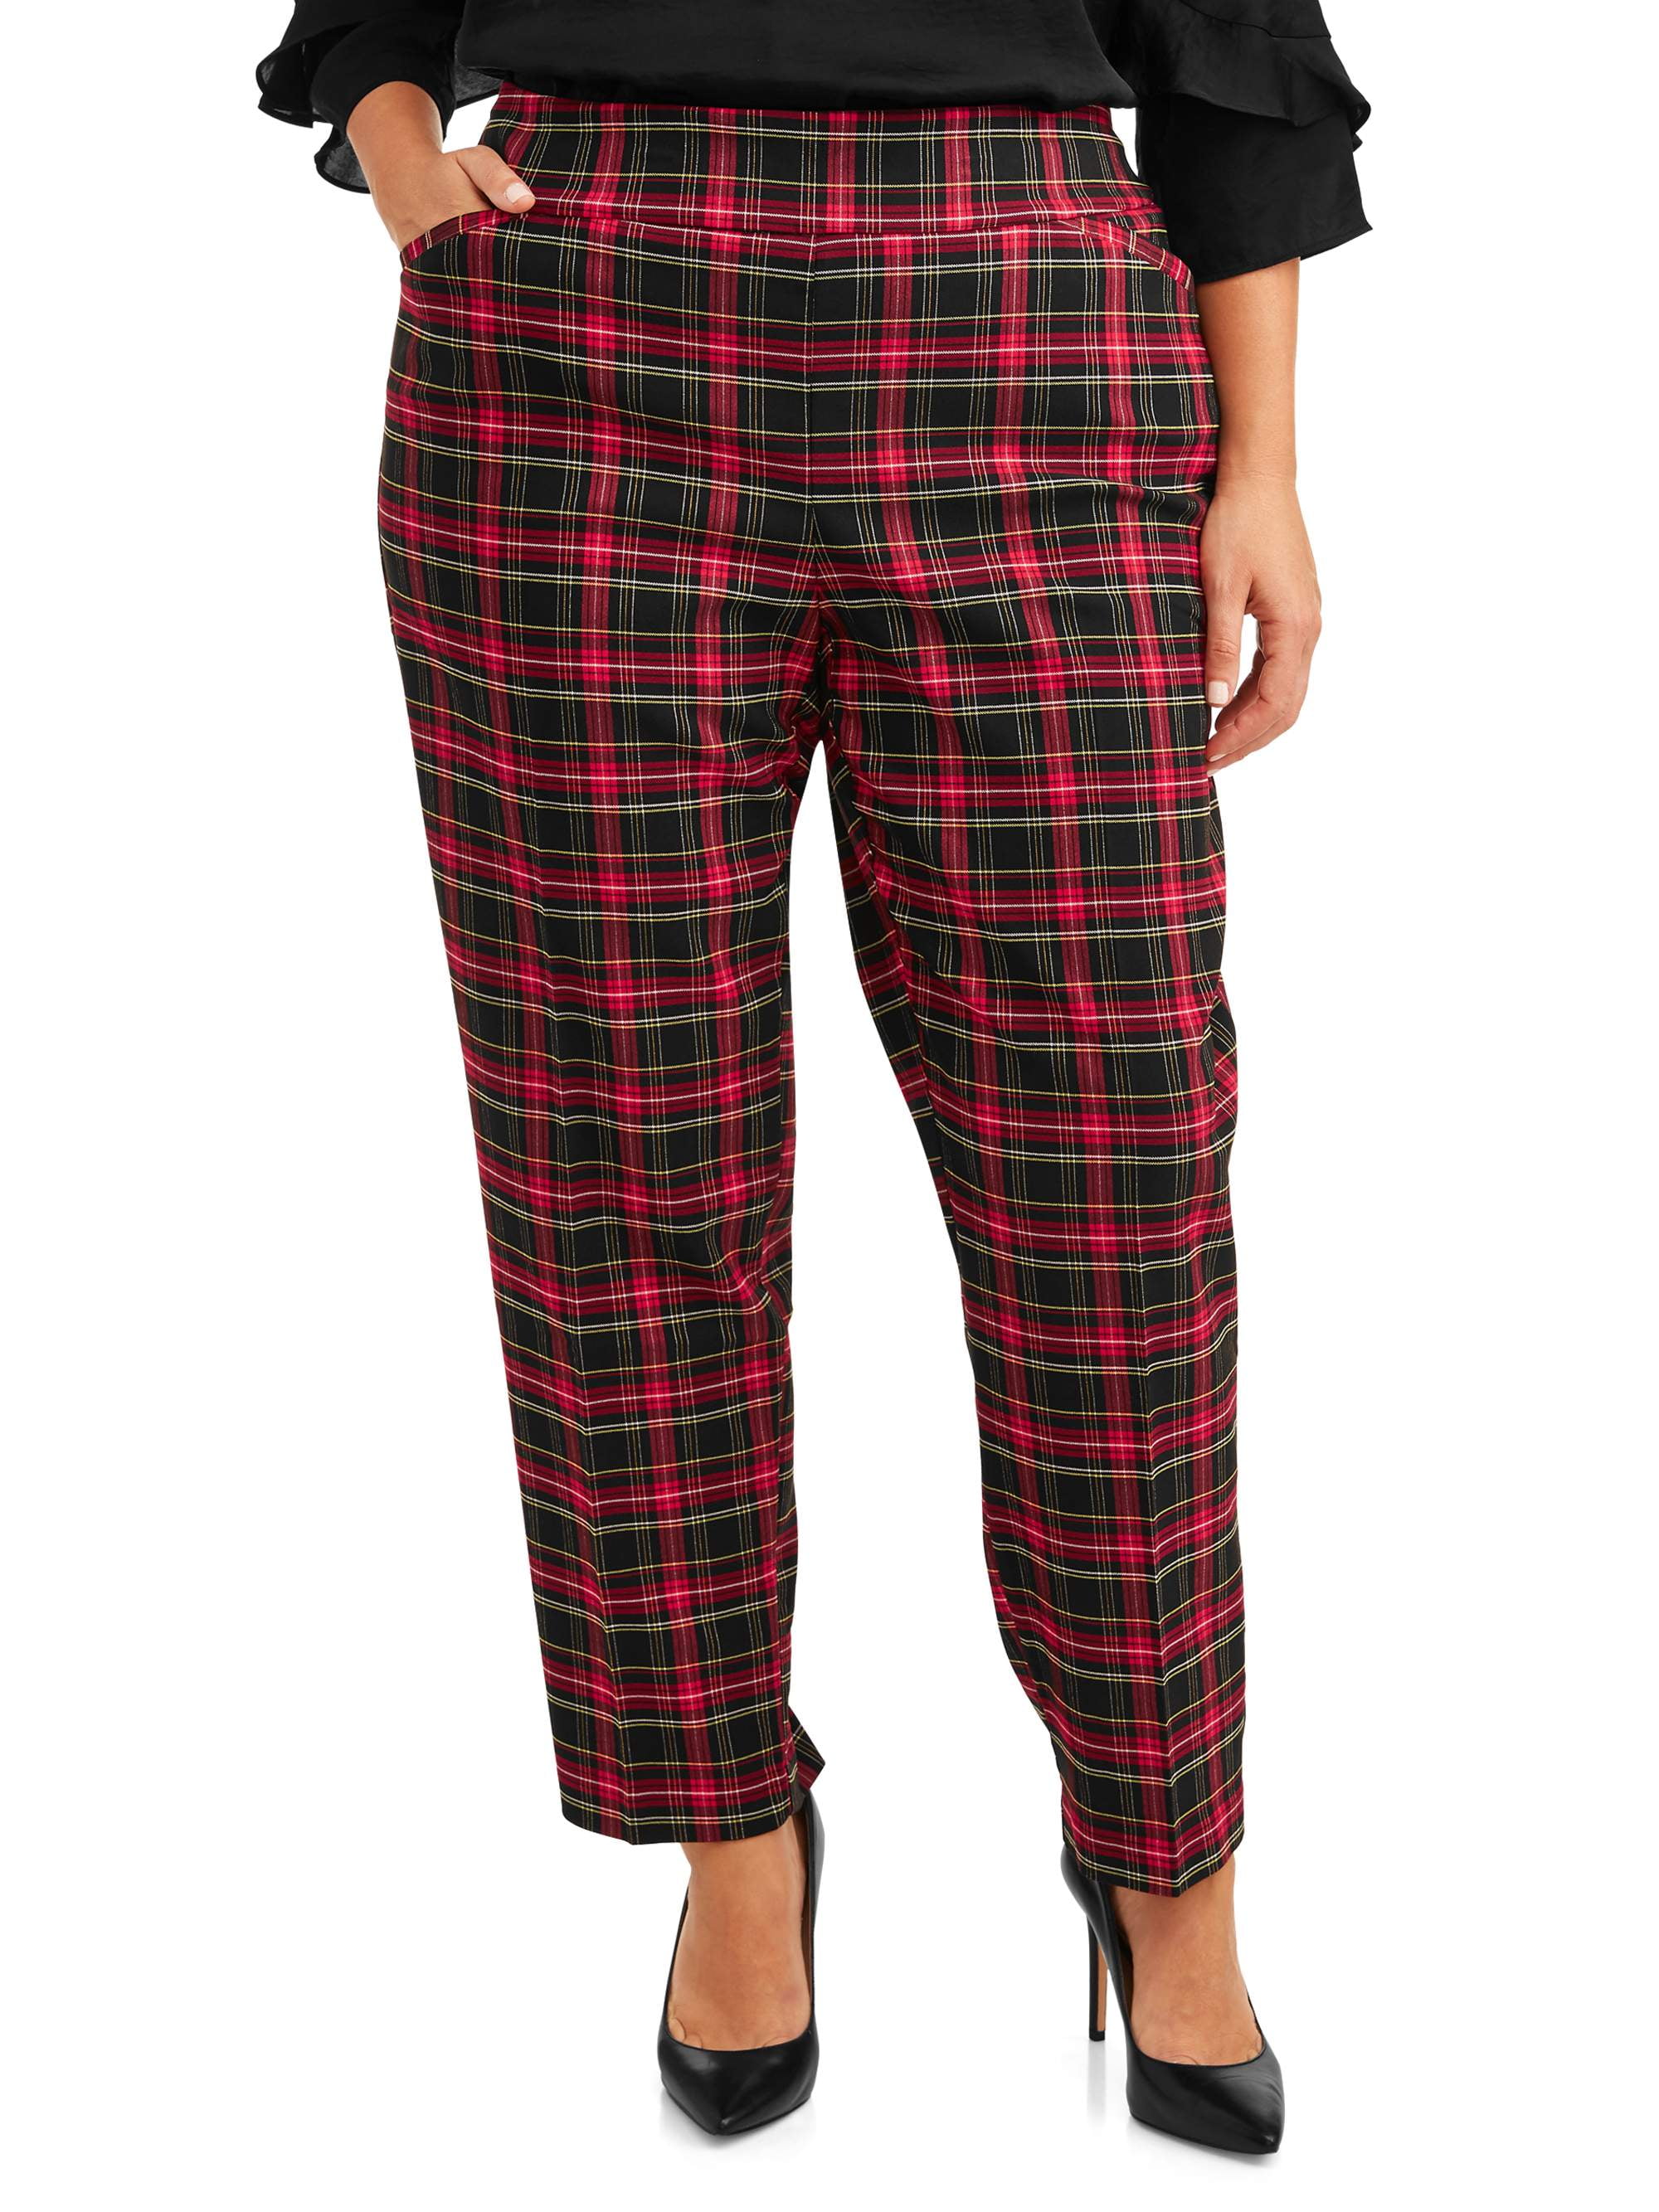 Amazoncom Gergeos Women Plaid Casual Pants Elastic Sport Fitness Plus  Size Ladies Pants Casual TrousersRedXL  Clothing Shoes  Jewelry